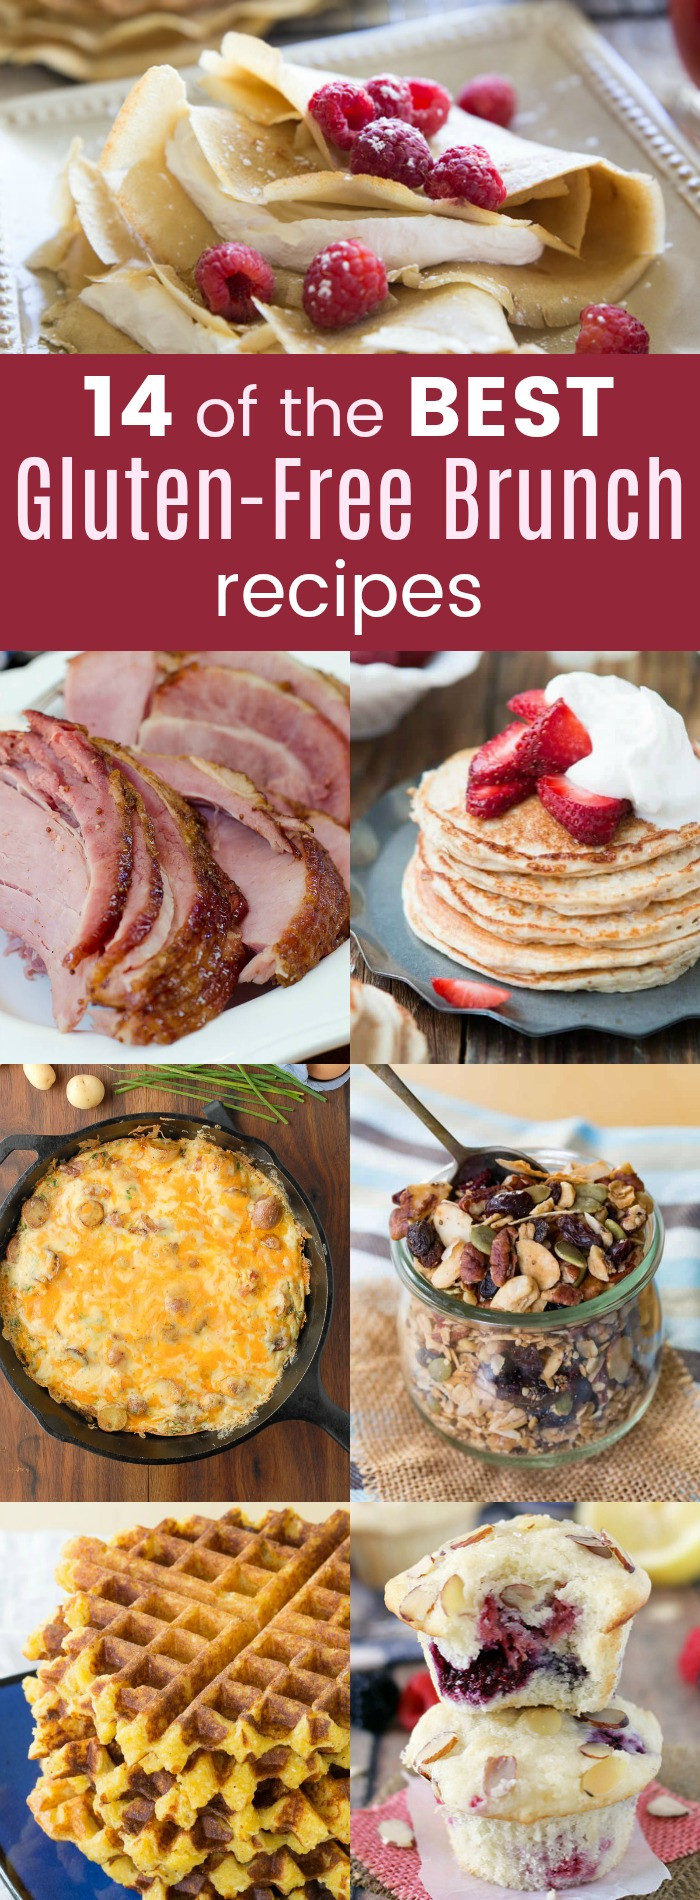 Gluten Free Easter Recipes
 14 of the Best Gluten Free Brunch Recipes for Easter and More